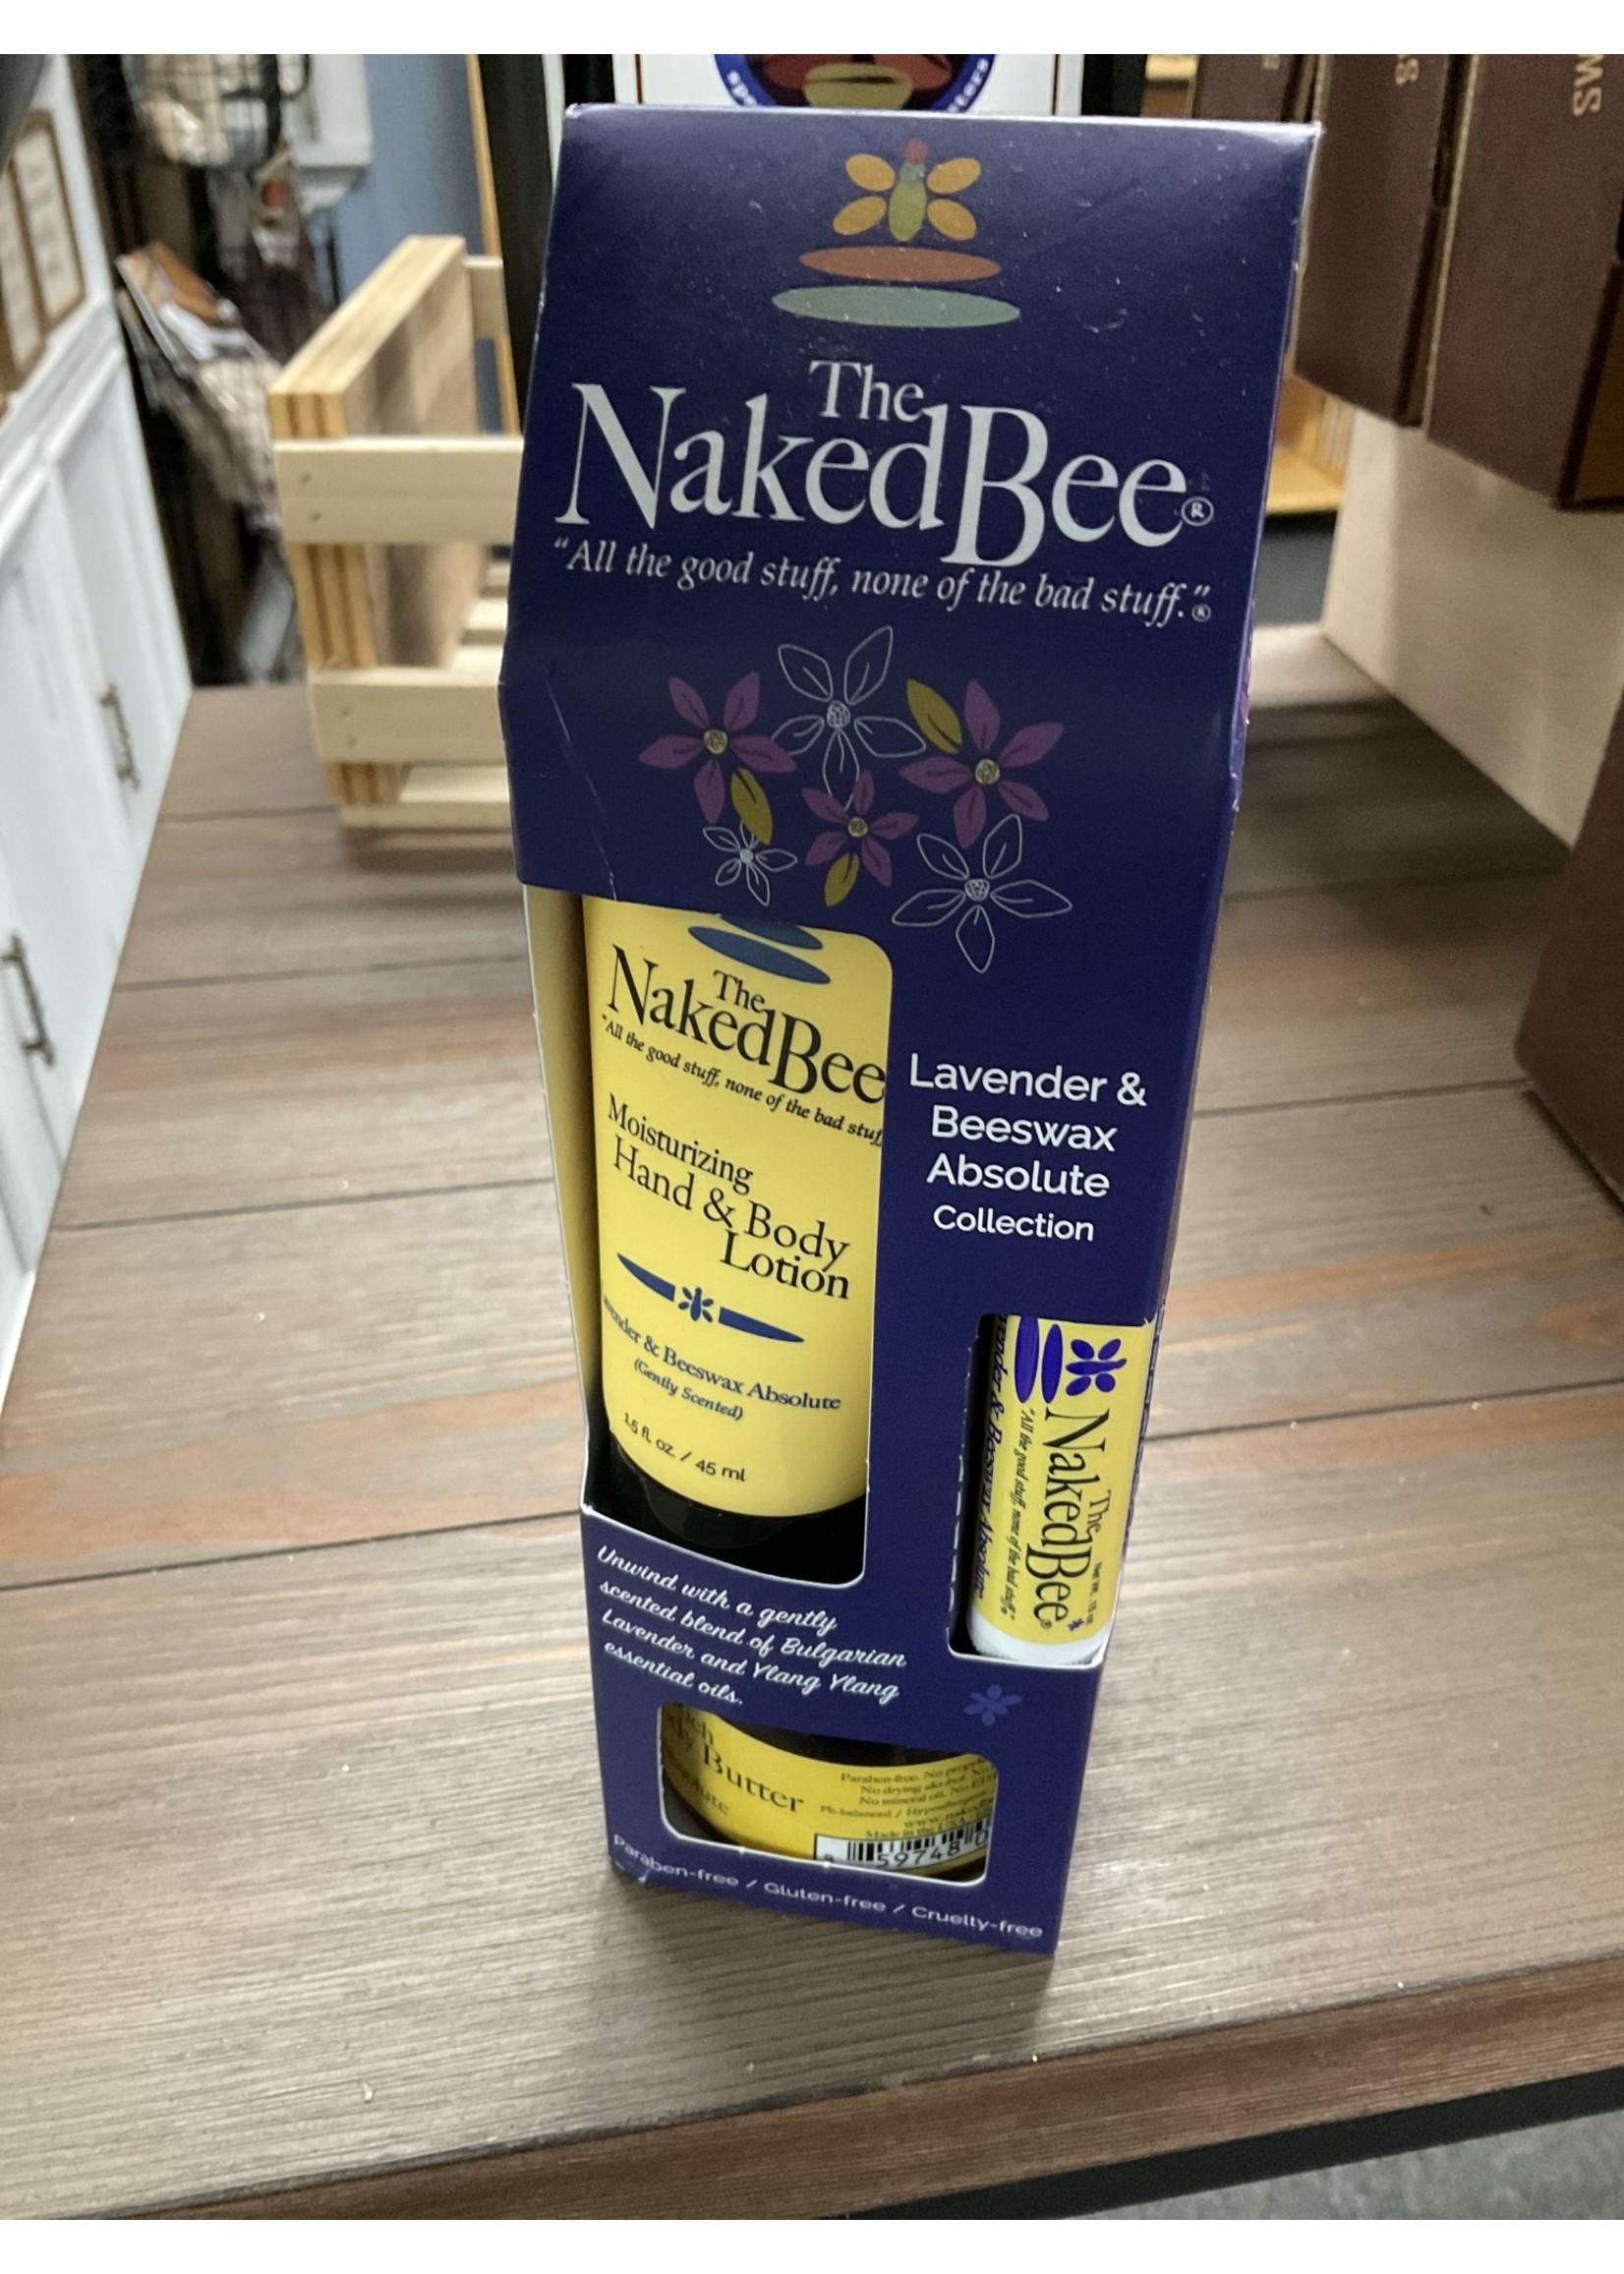 The Naked Bee Collection-Lavender & Beeswax Absolute Lotion, Lip Balm and Body Cream